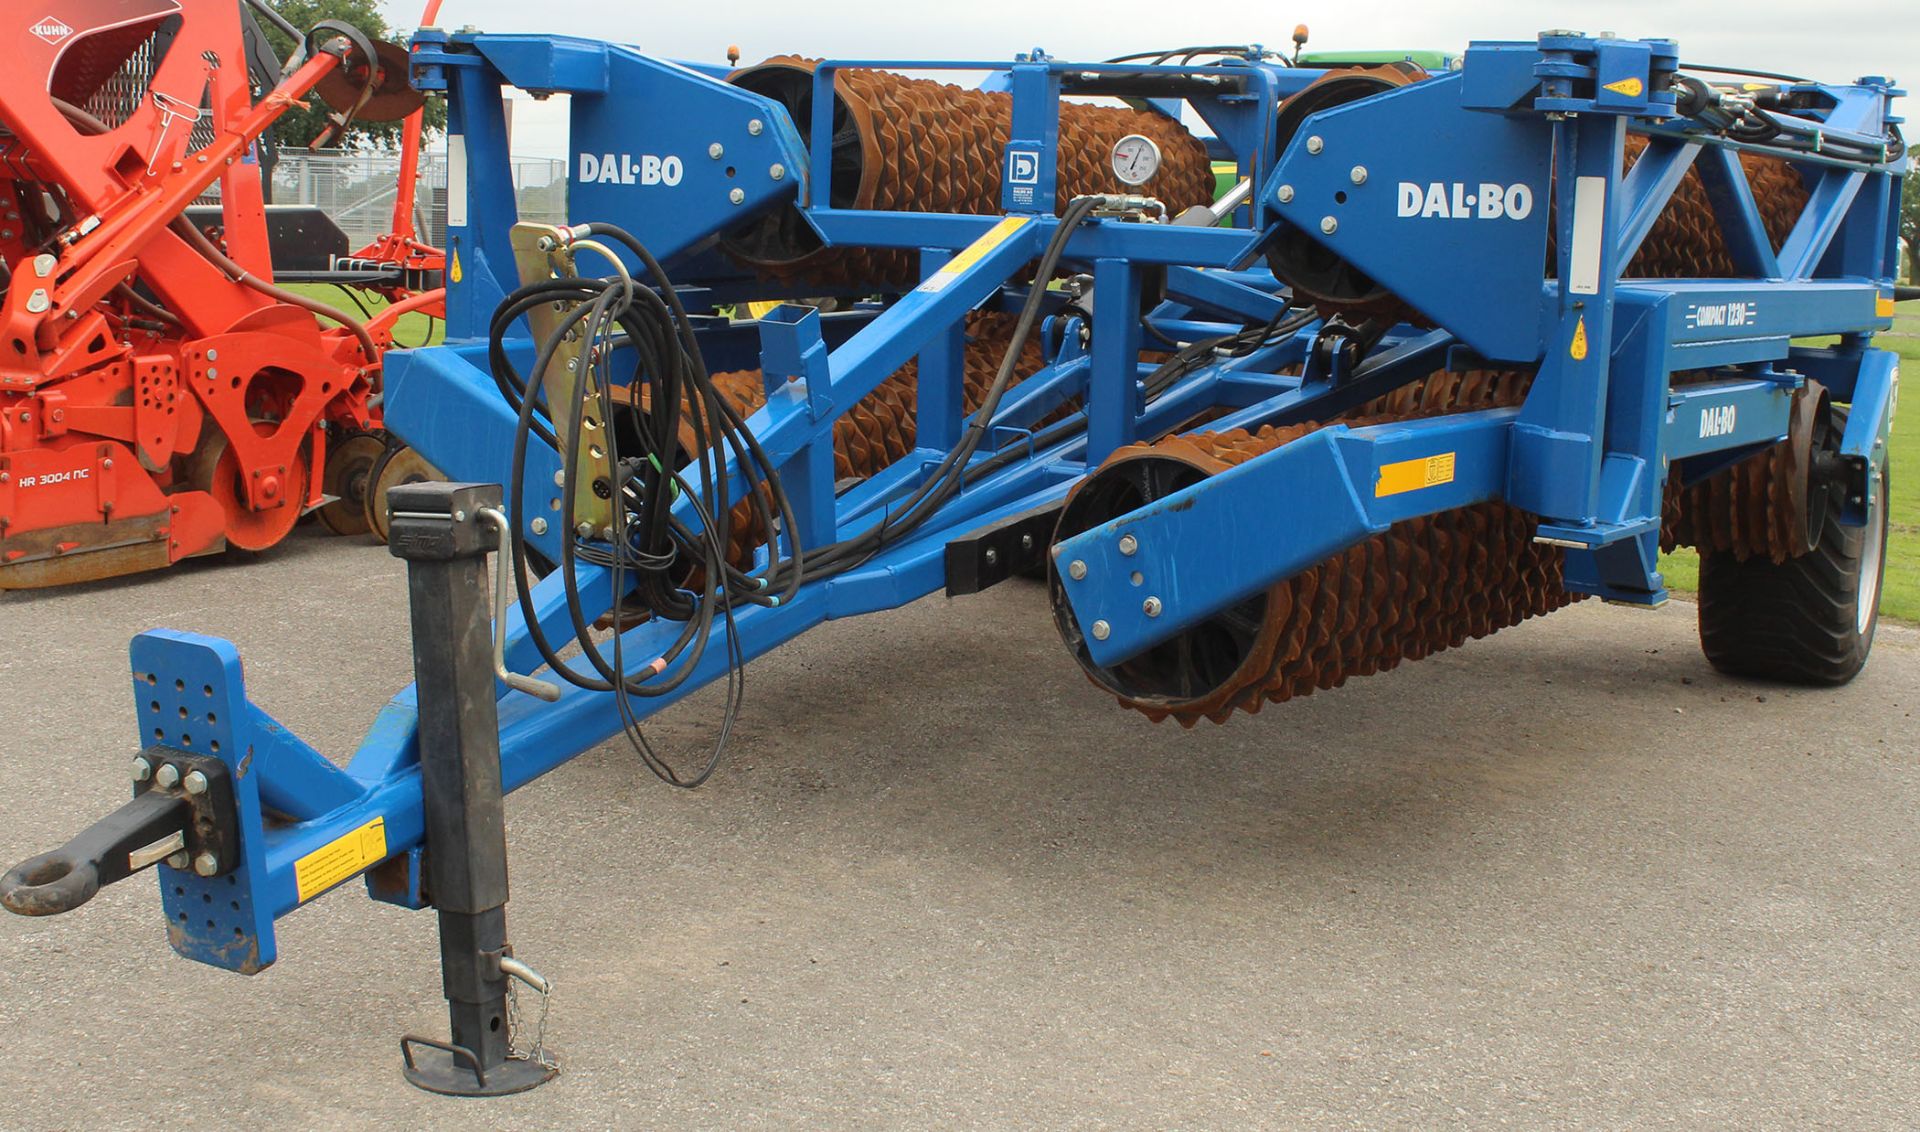 A 2014/15 12.3 METRE DAL-BQ COMPACT 1230 WITH FOLDING ROLLERS AND INSTRUCTION BOOK/MANUAL - Image 2 of 5